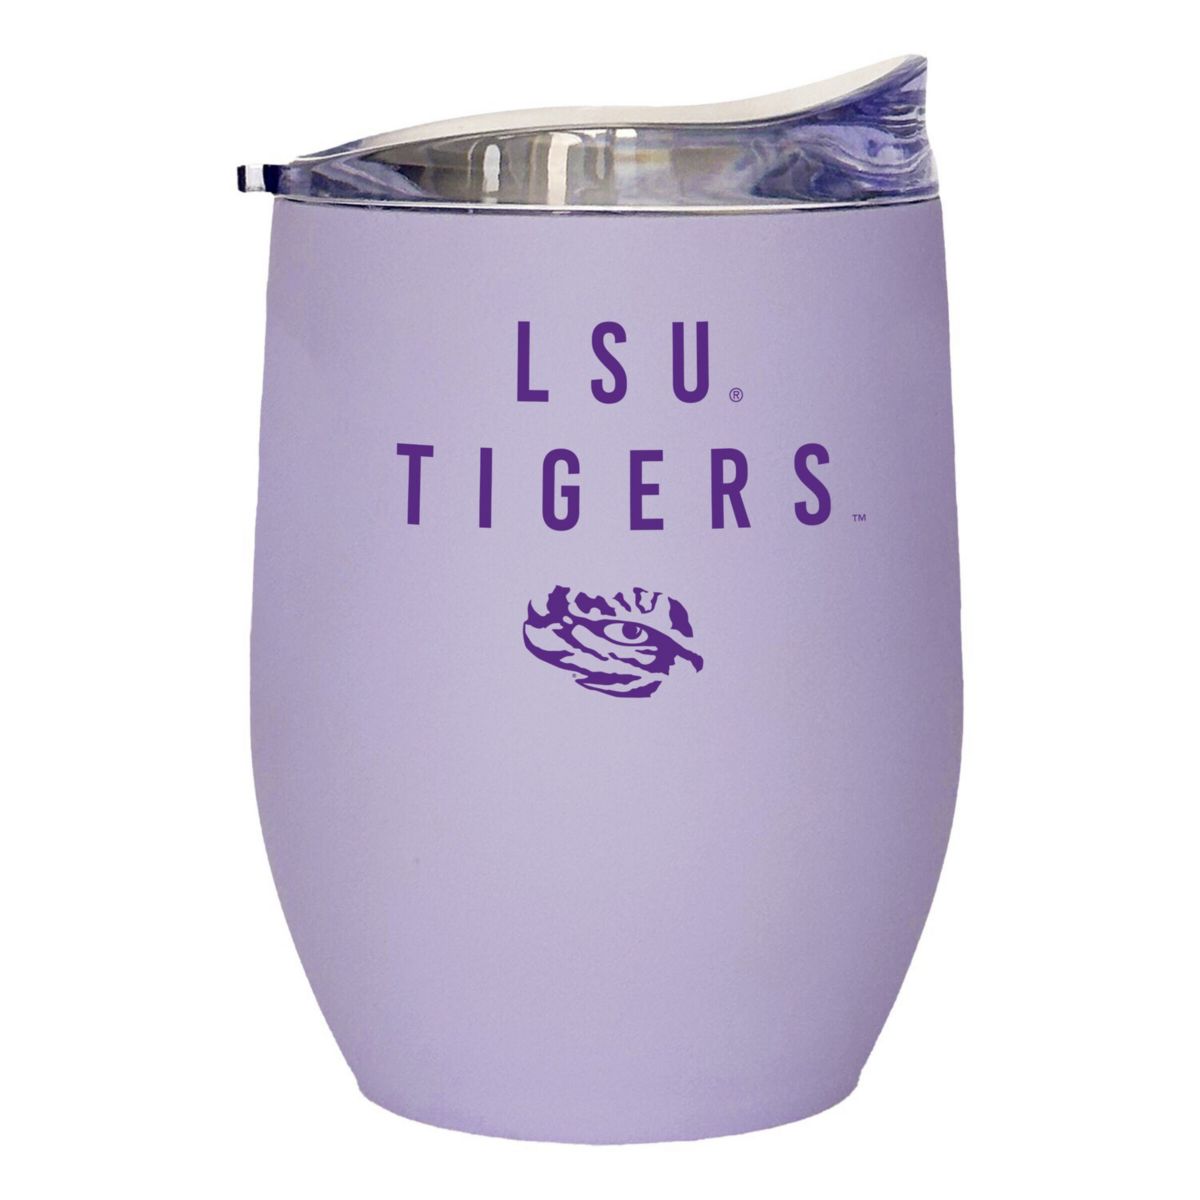 LSU Tigers 16oz. Lavender Soft Touch Curved Tumbler Logo Brand